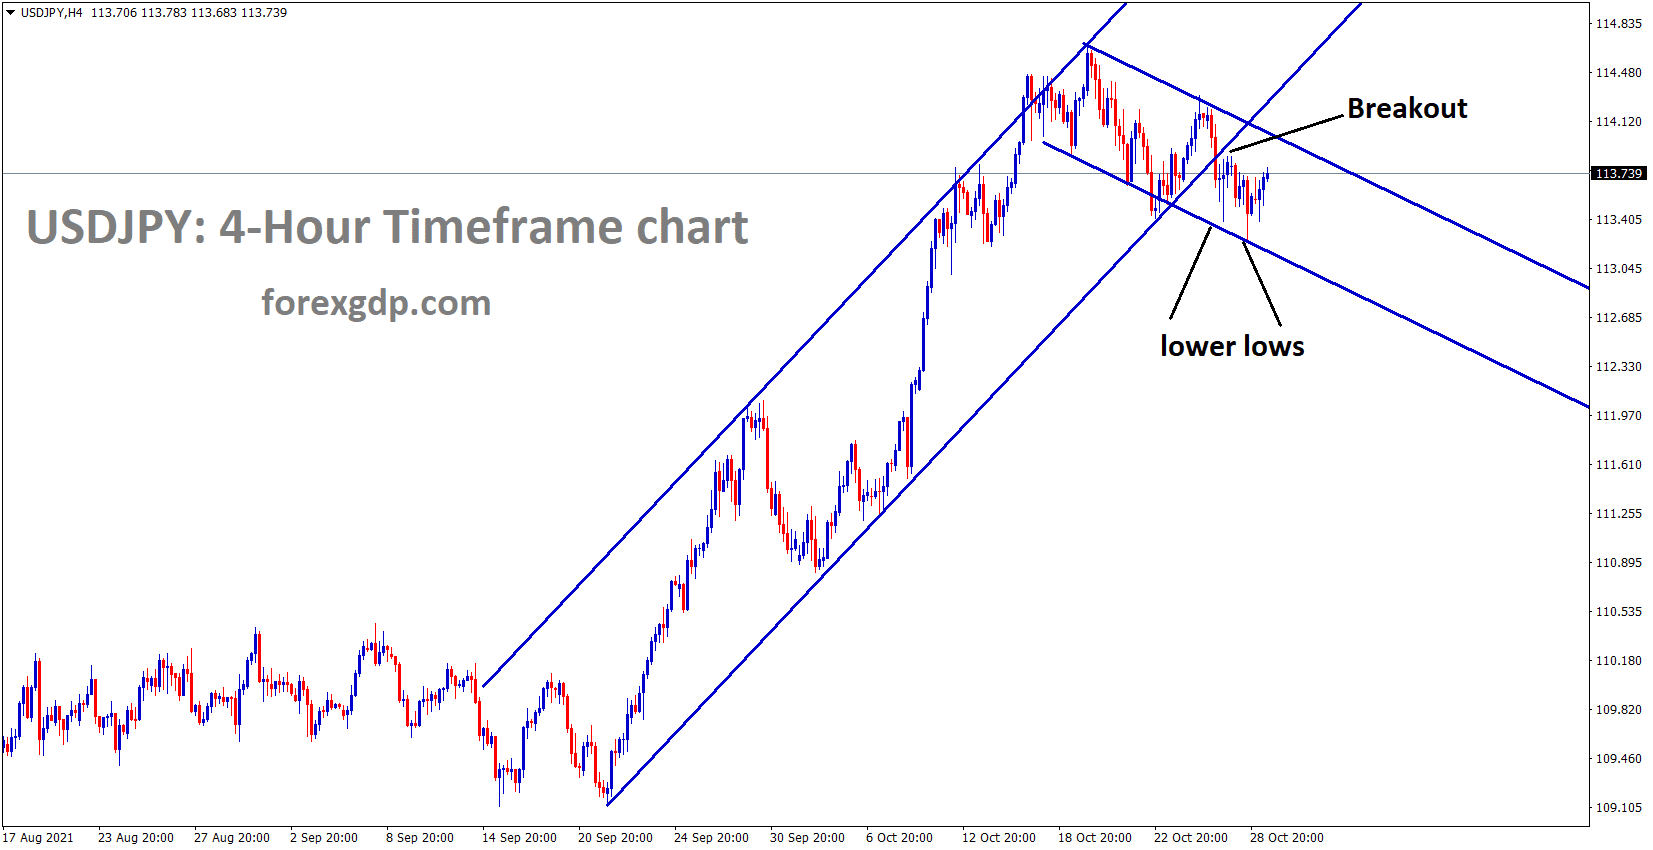 USDJPY has broken an Ascending channel now the market has rebounded from the lower low area of the minor descending channel.